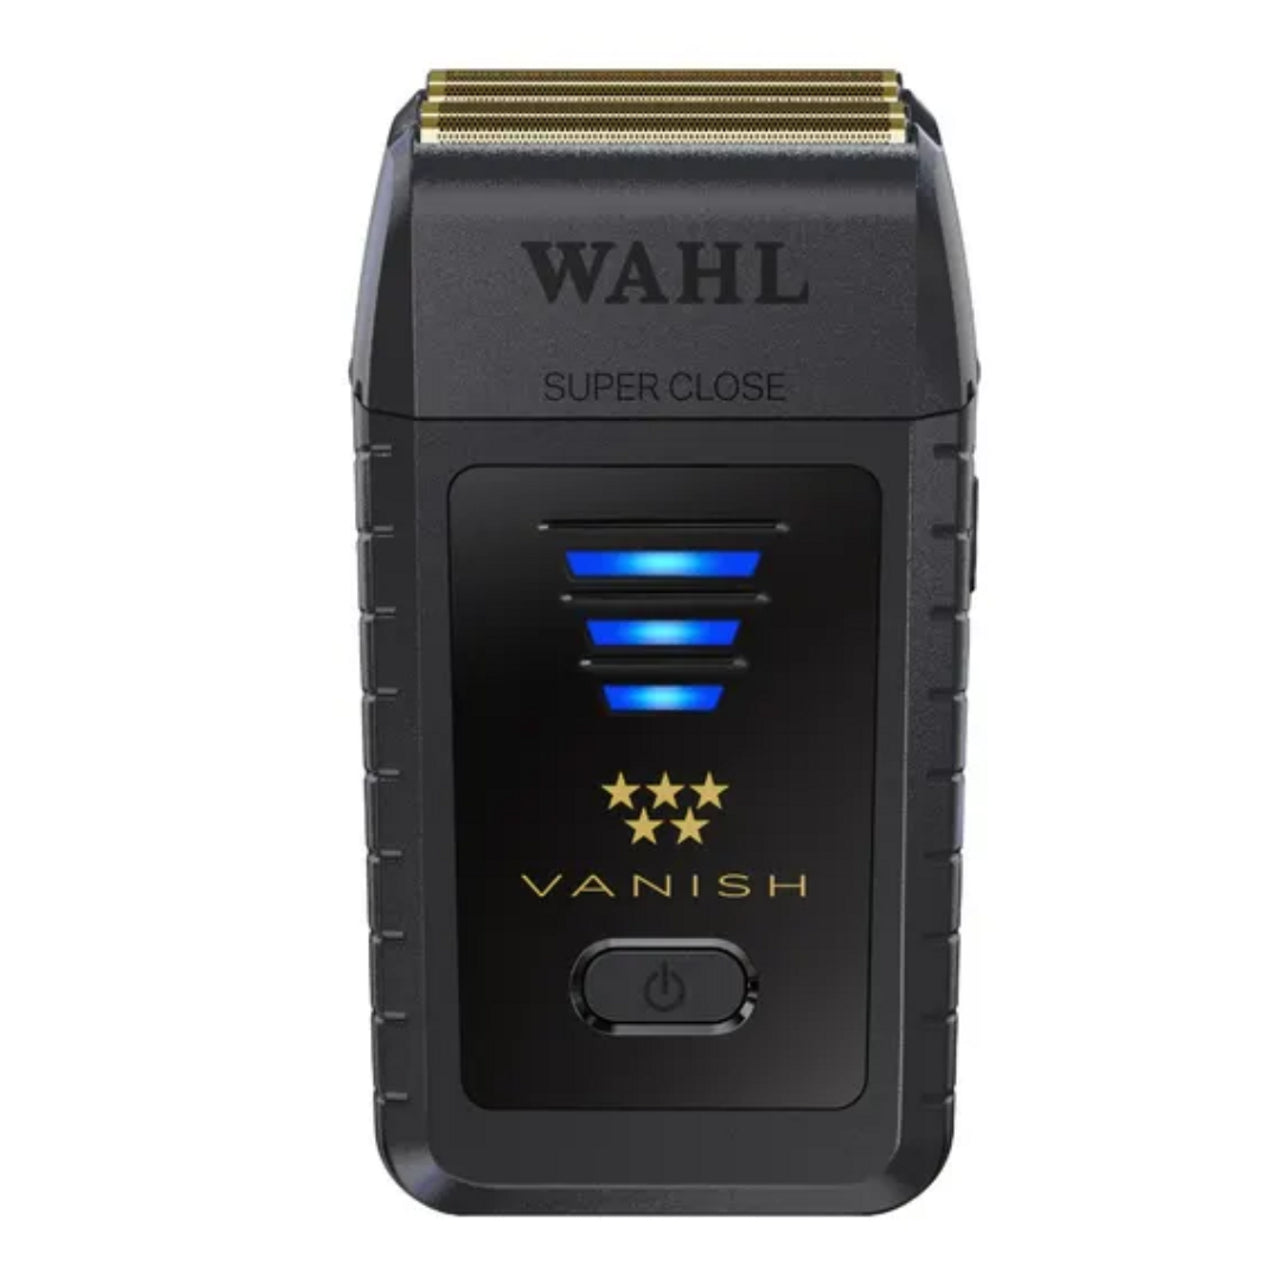 Wahl Vanish Lithium Ion Shaver NEW ARRIVAL